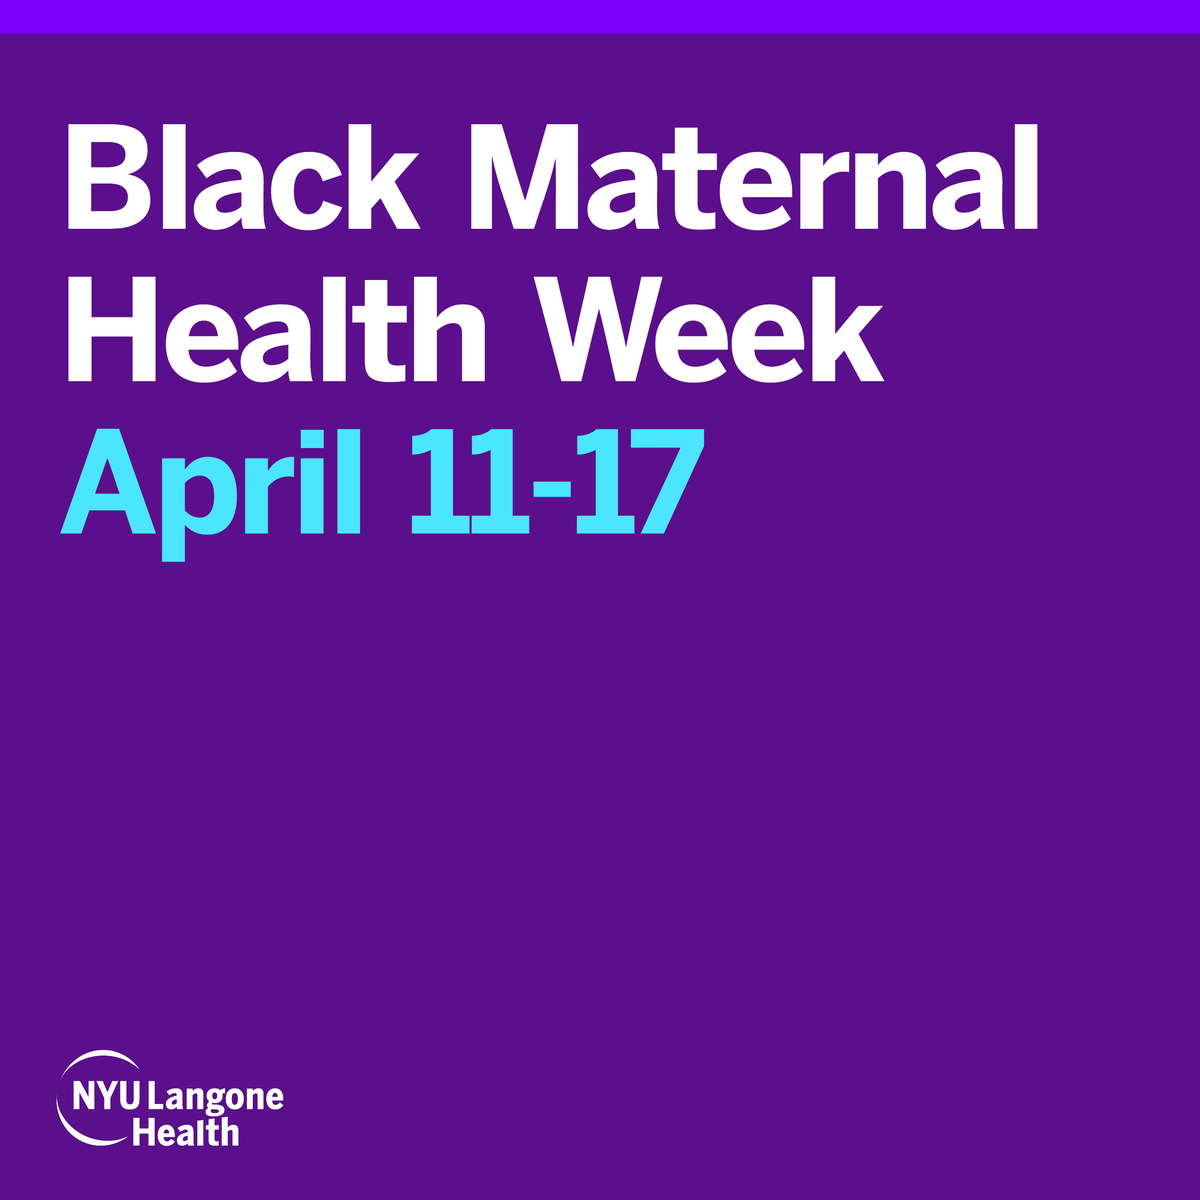 #BlackMaternalHealthWeek is a week of awareness, justice, and community-building aimed at elevating and empowering the voices of Black mothers. Learn about the work we are doing to improve maternal health led by @DrNatWilliams: bit.ly/49r57R4 #maternalhealthequity